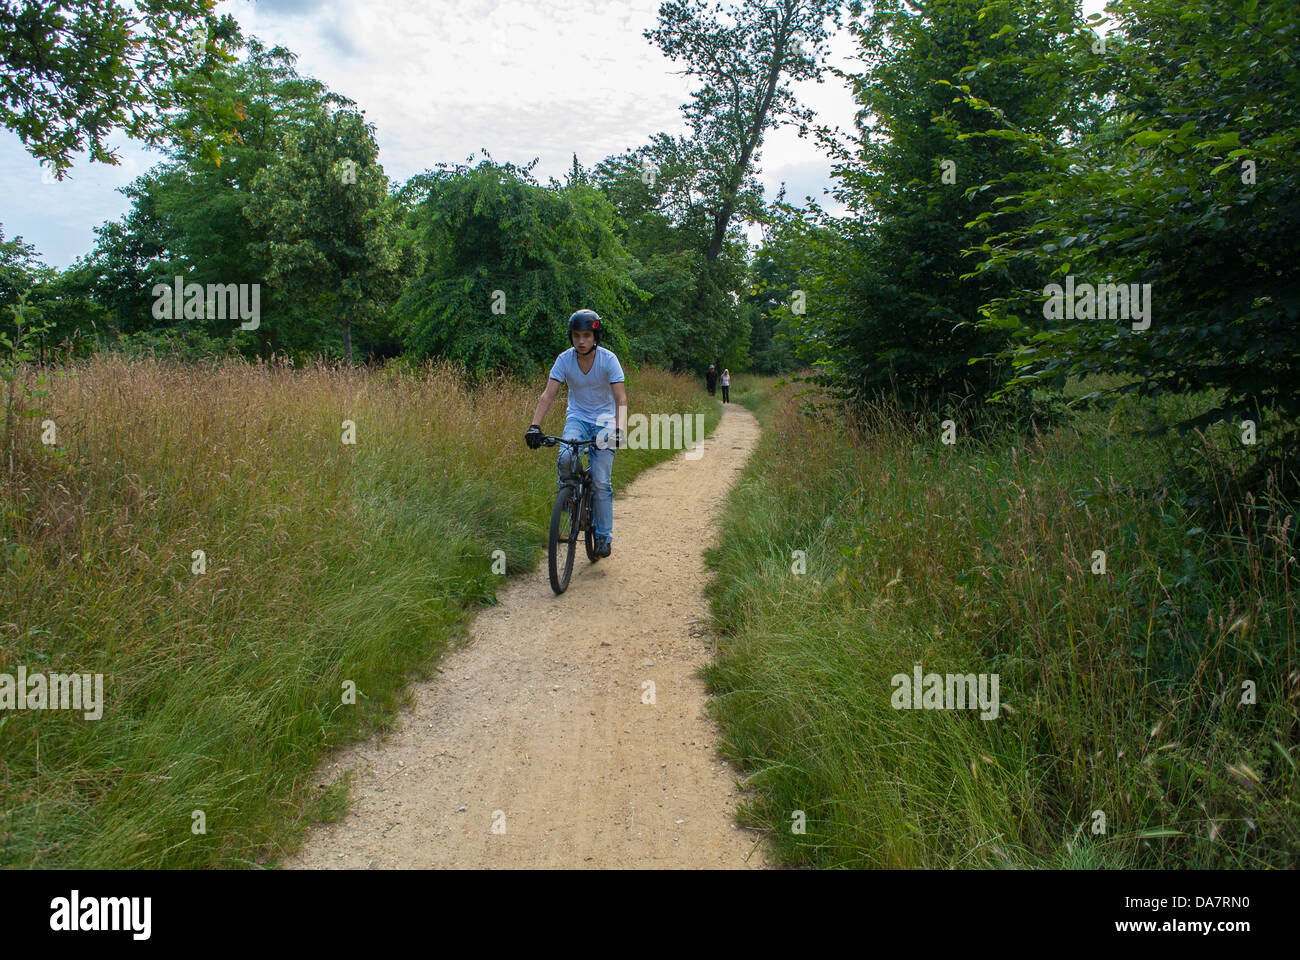 Paris, France, People Bicycling in Public Park, Bois de VIncennes, Summer Day, Trail, vacation, holidays Stock Photo